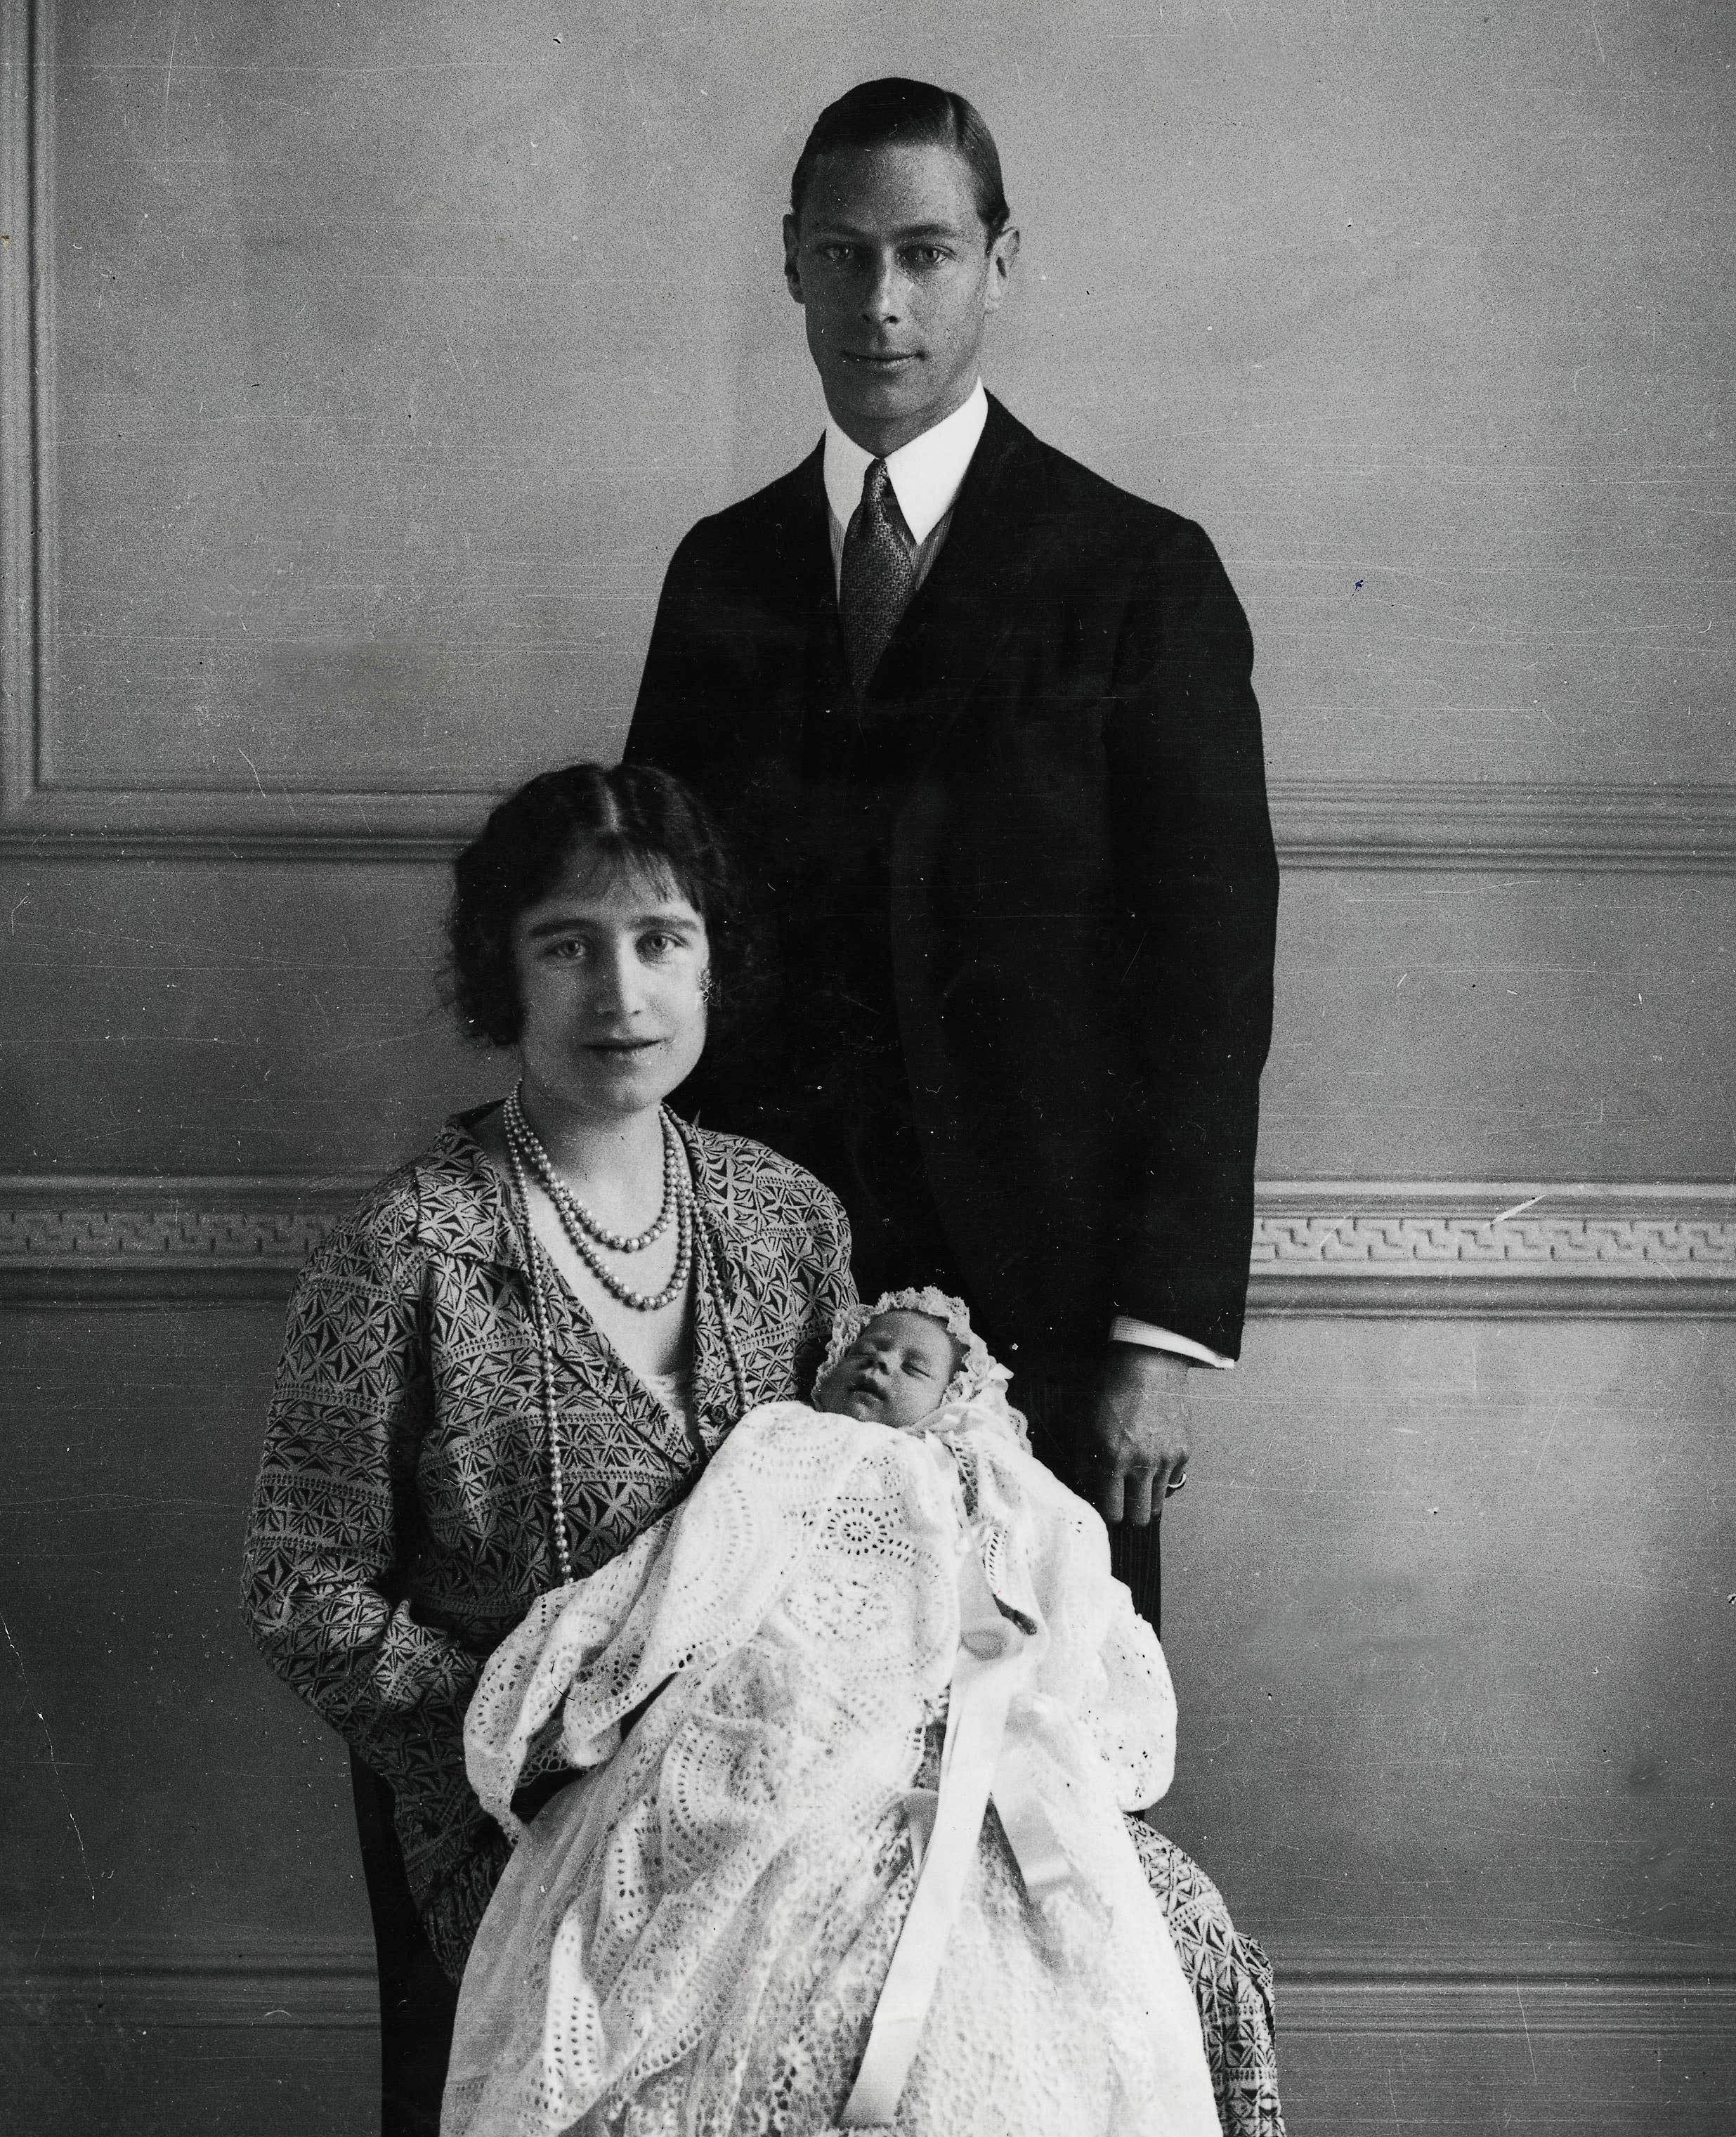 The Duke and Duchess of York (later King George VI and Queen Elizabeth, the Queen Mother) pictured with their daughter (later, Queen Elizabeth II) in 1926 | Source: Getty Images